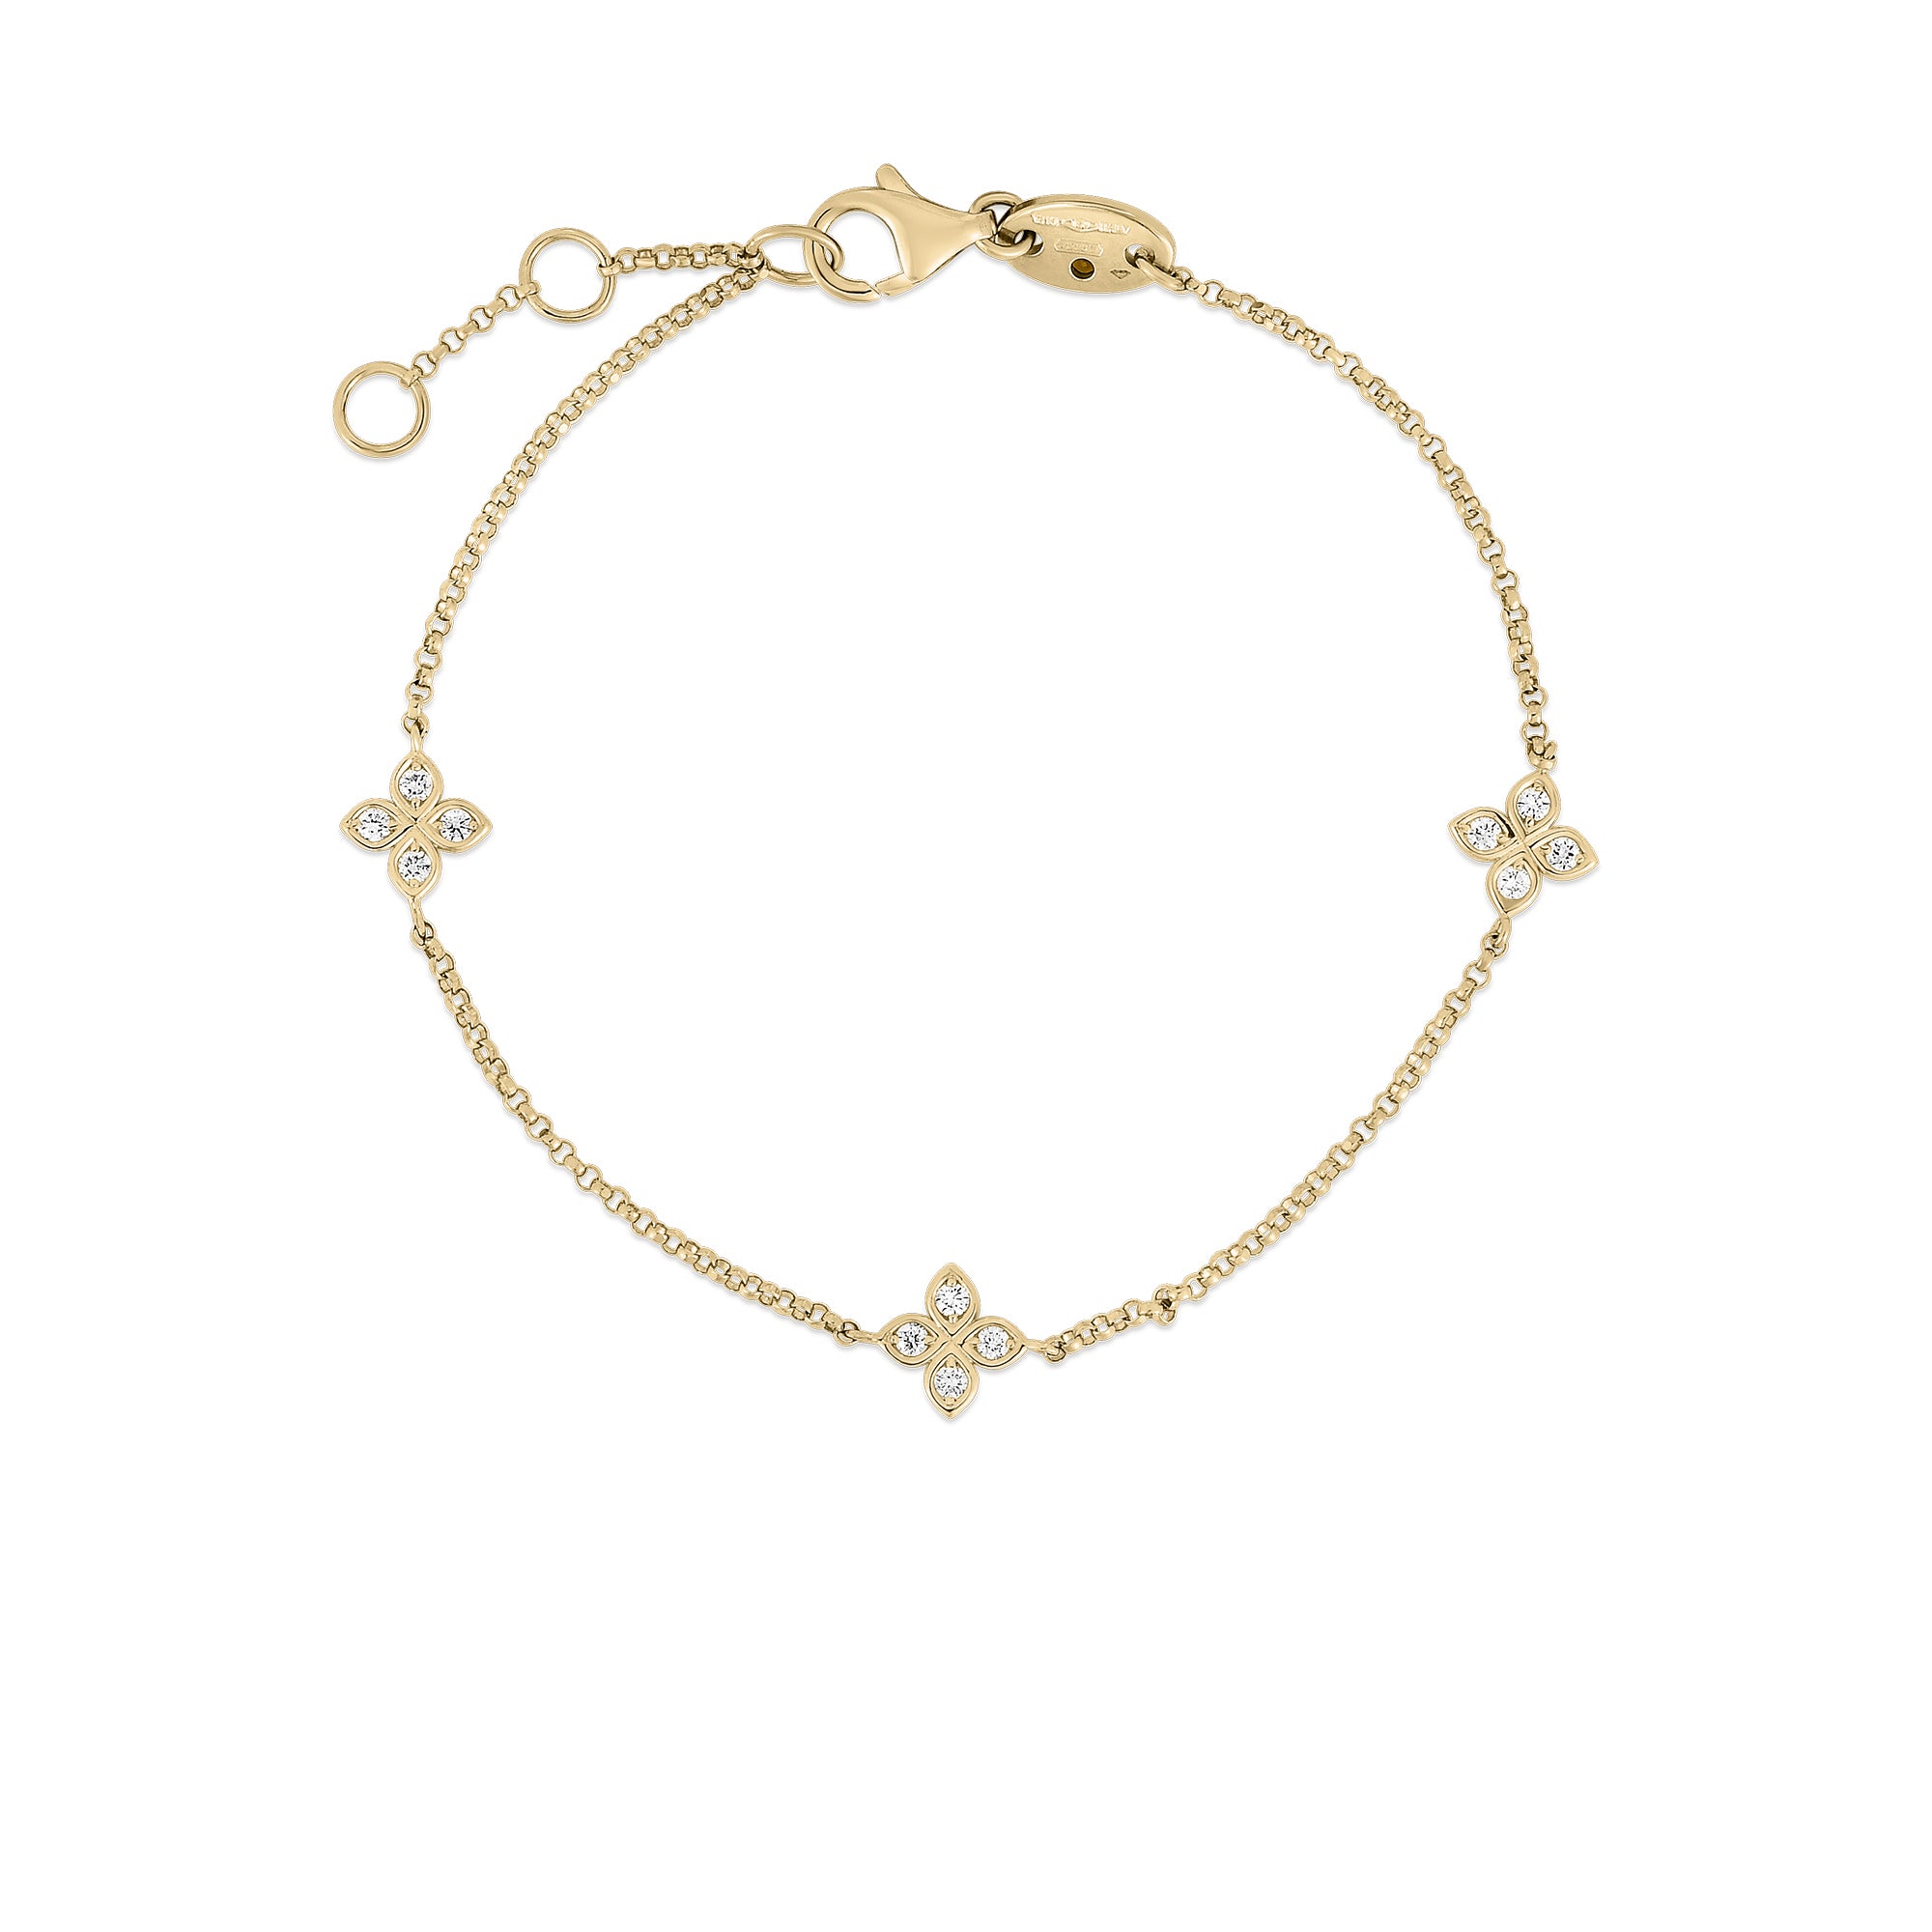 18K YELLOW GOLD LOVE BY THE INCH 3 STATION FLOWER BRACELET